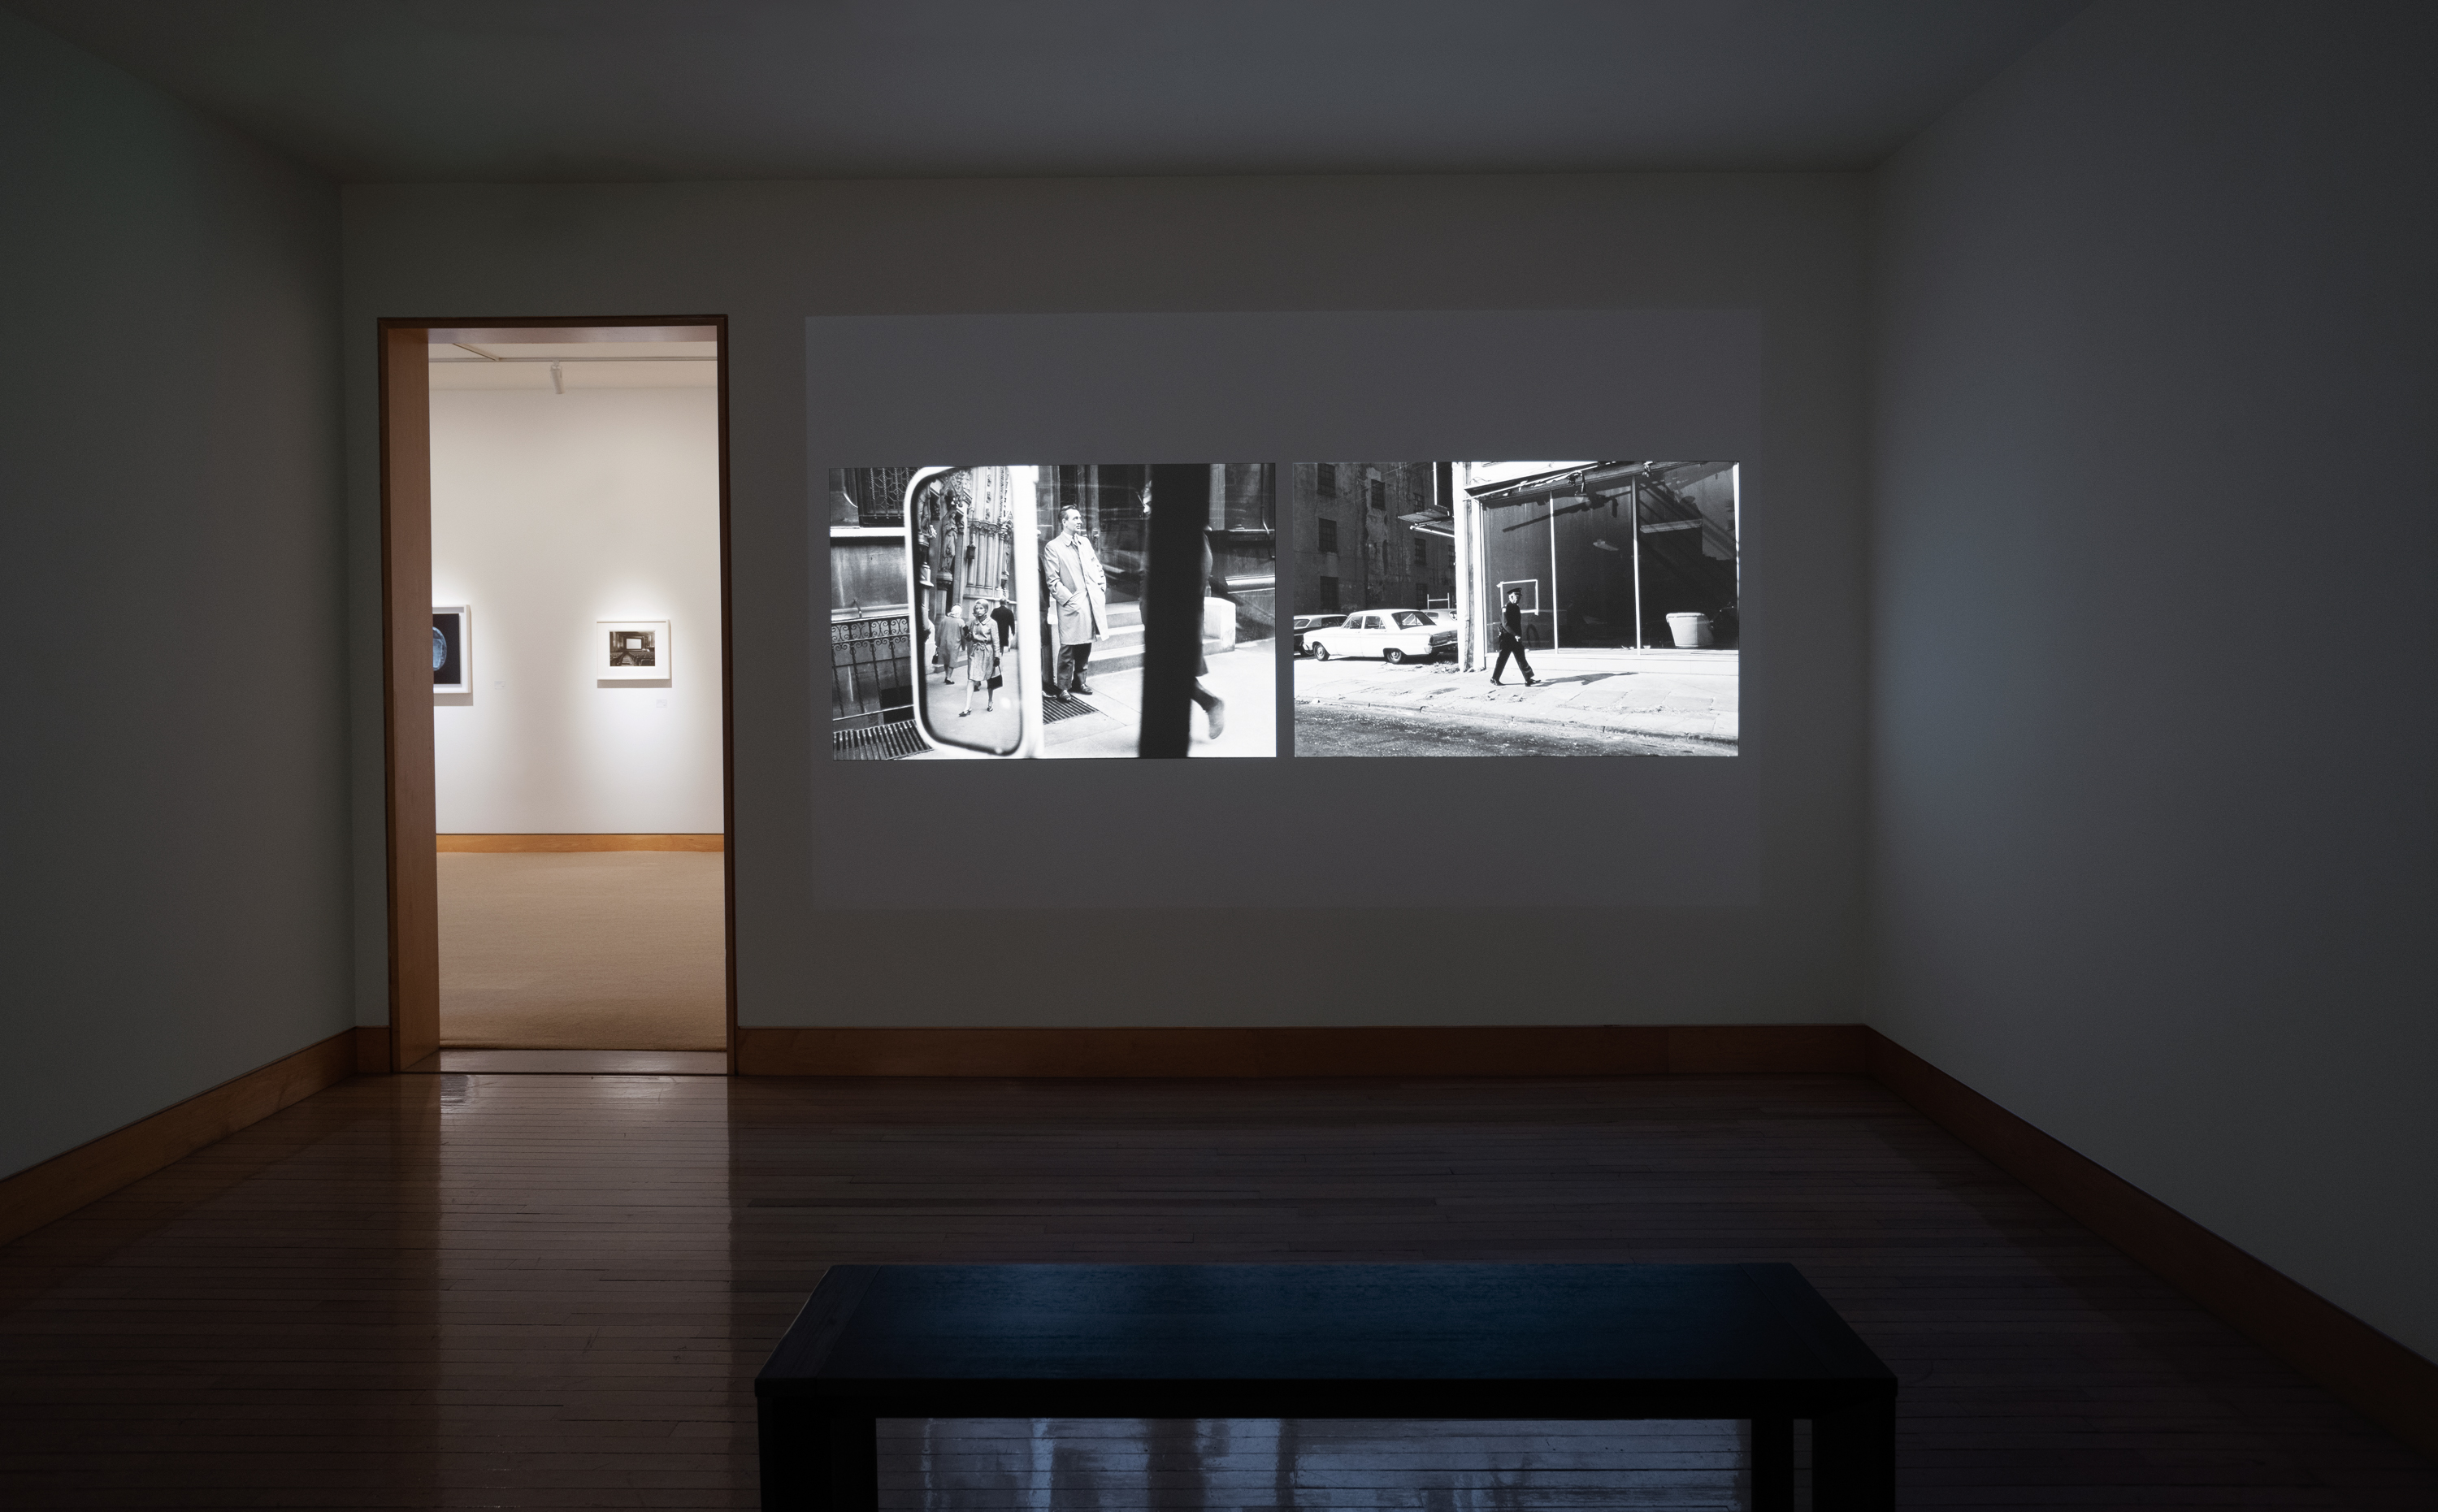 Color image of a gallery exhibiting black and white photographs via projection onto white gallery wall